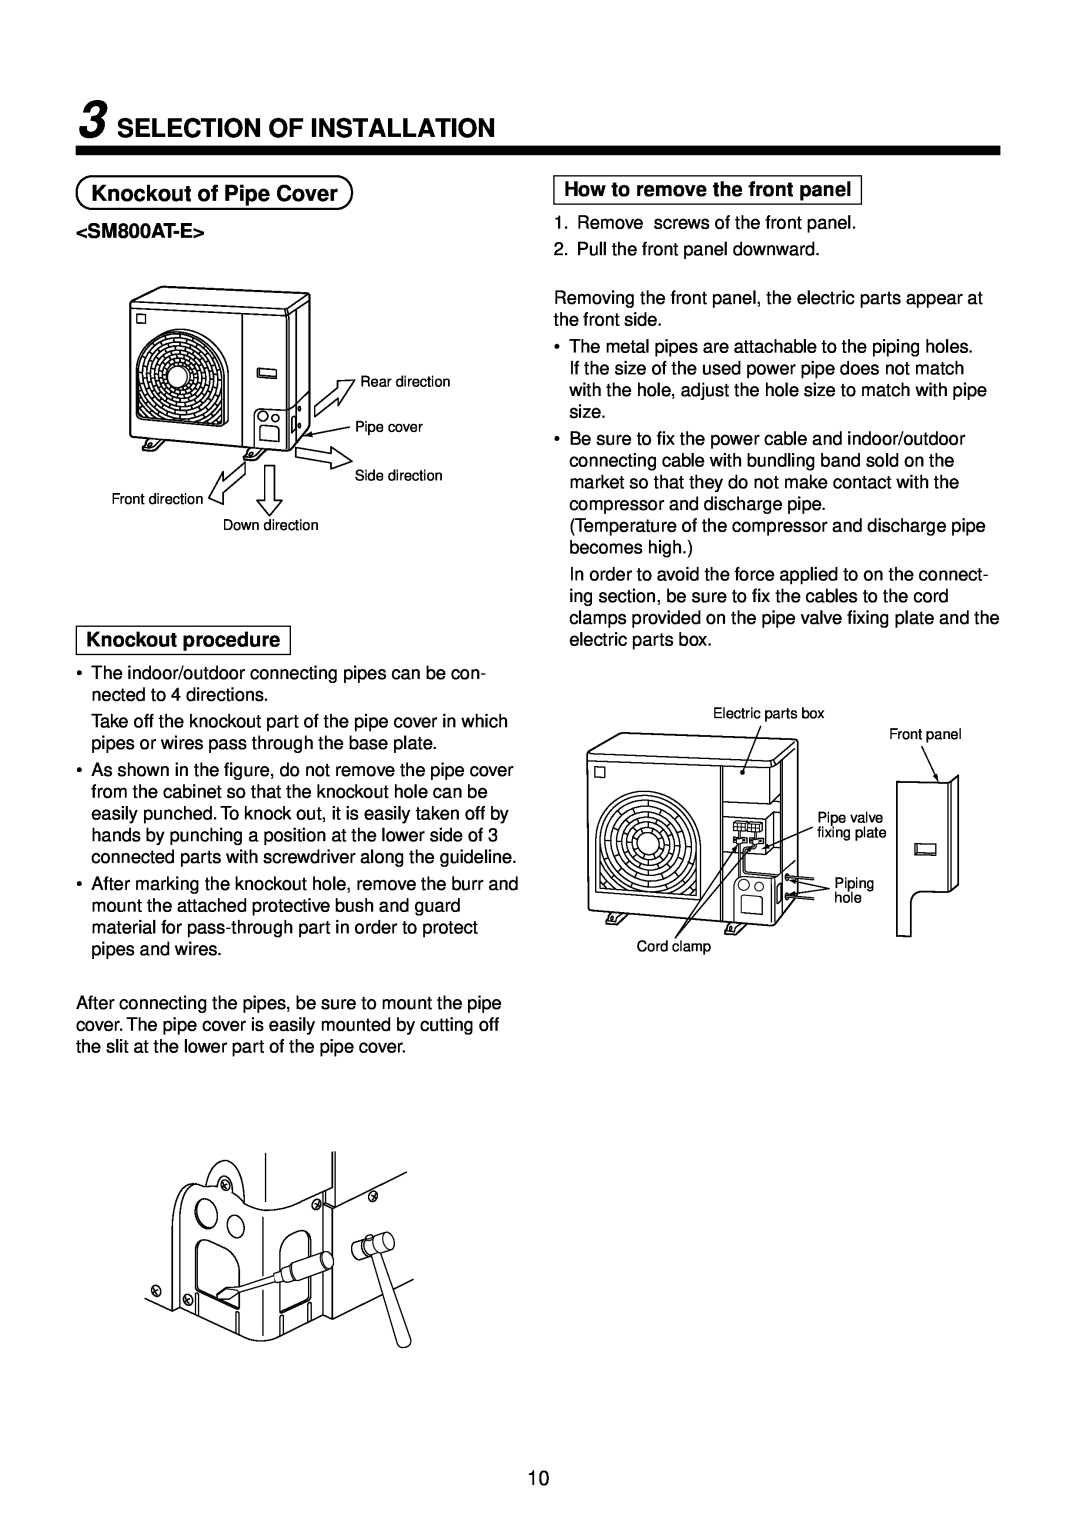 Toshiba R410A service manual Knockout of Pipe Cover, <SM800AT-E>, Knockout procedure, How to remove the front panel 